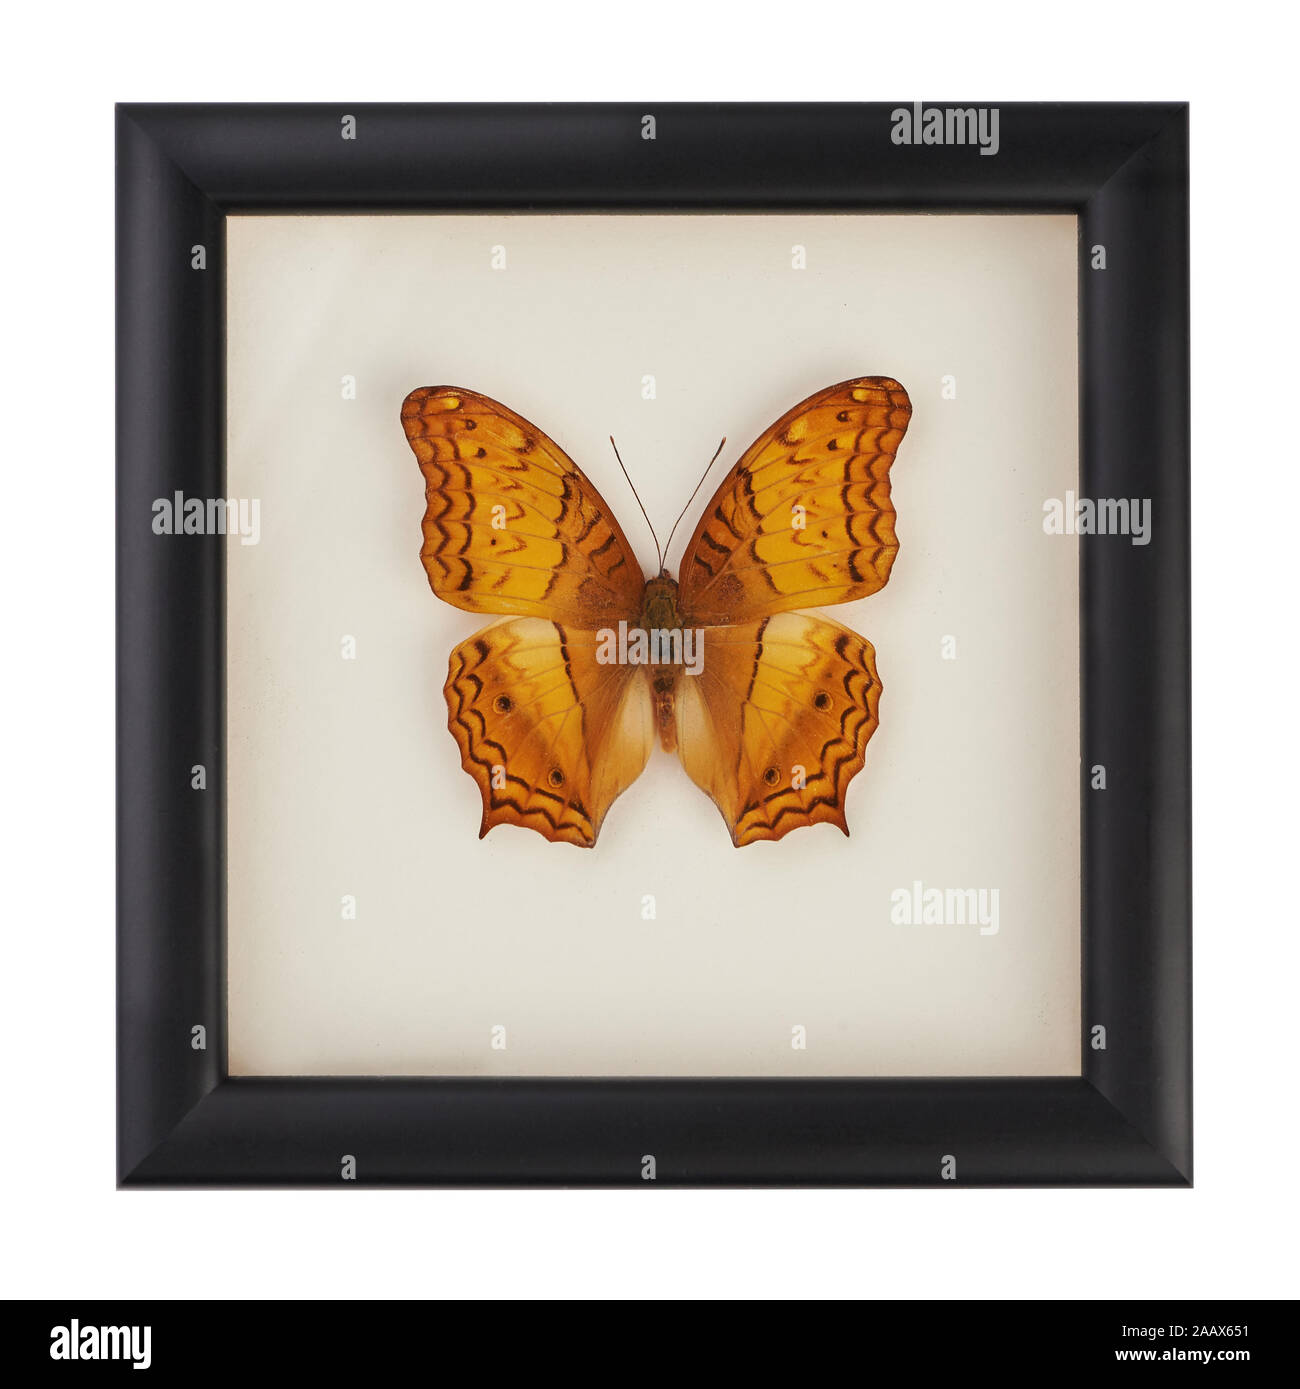 Beautiful yellow and orange butterfly in a black frame under glass. A rare species of butterflies. Vindula erota butterfly isolated on white Stock Photo